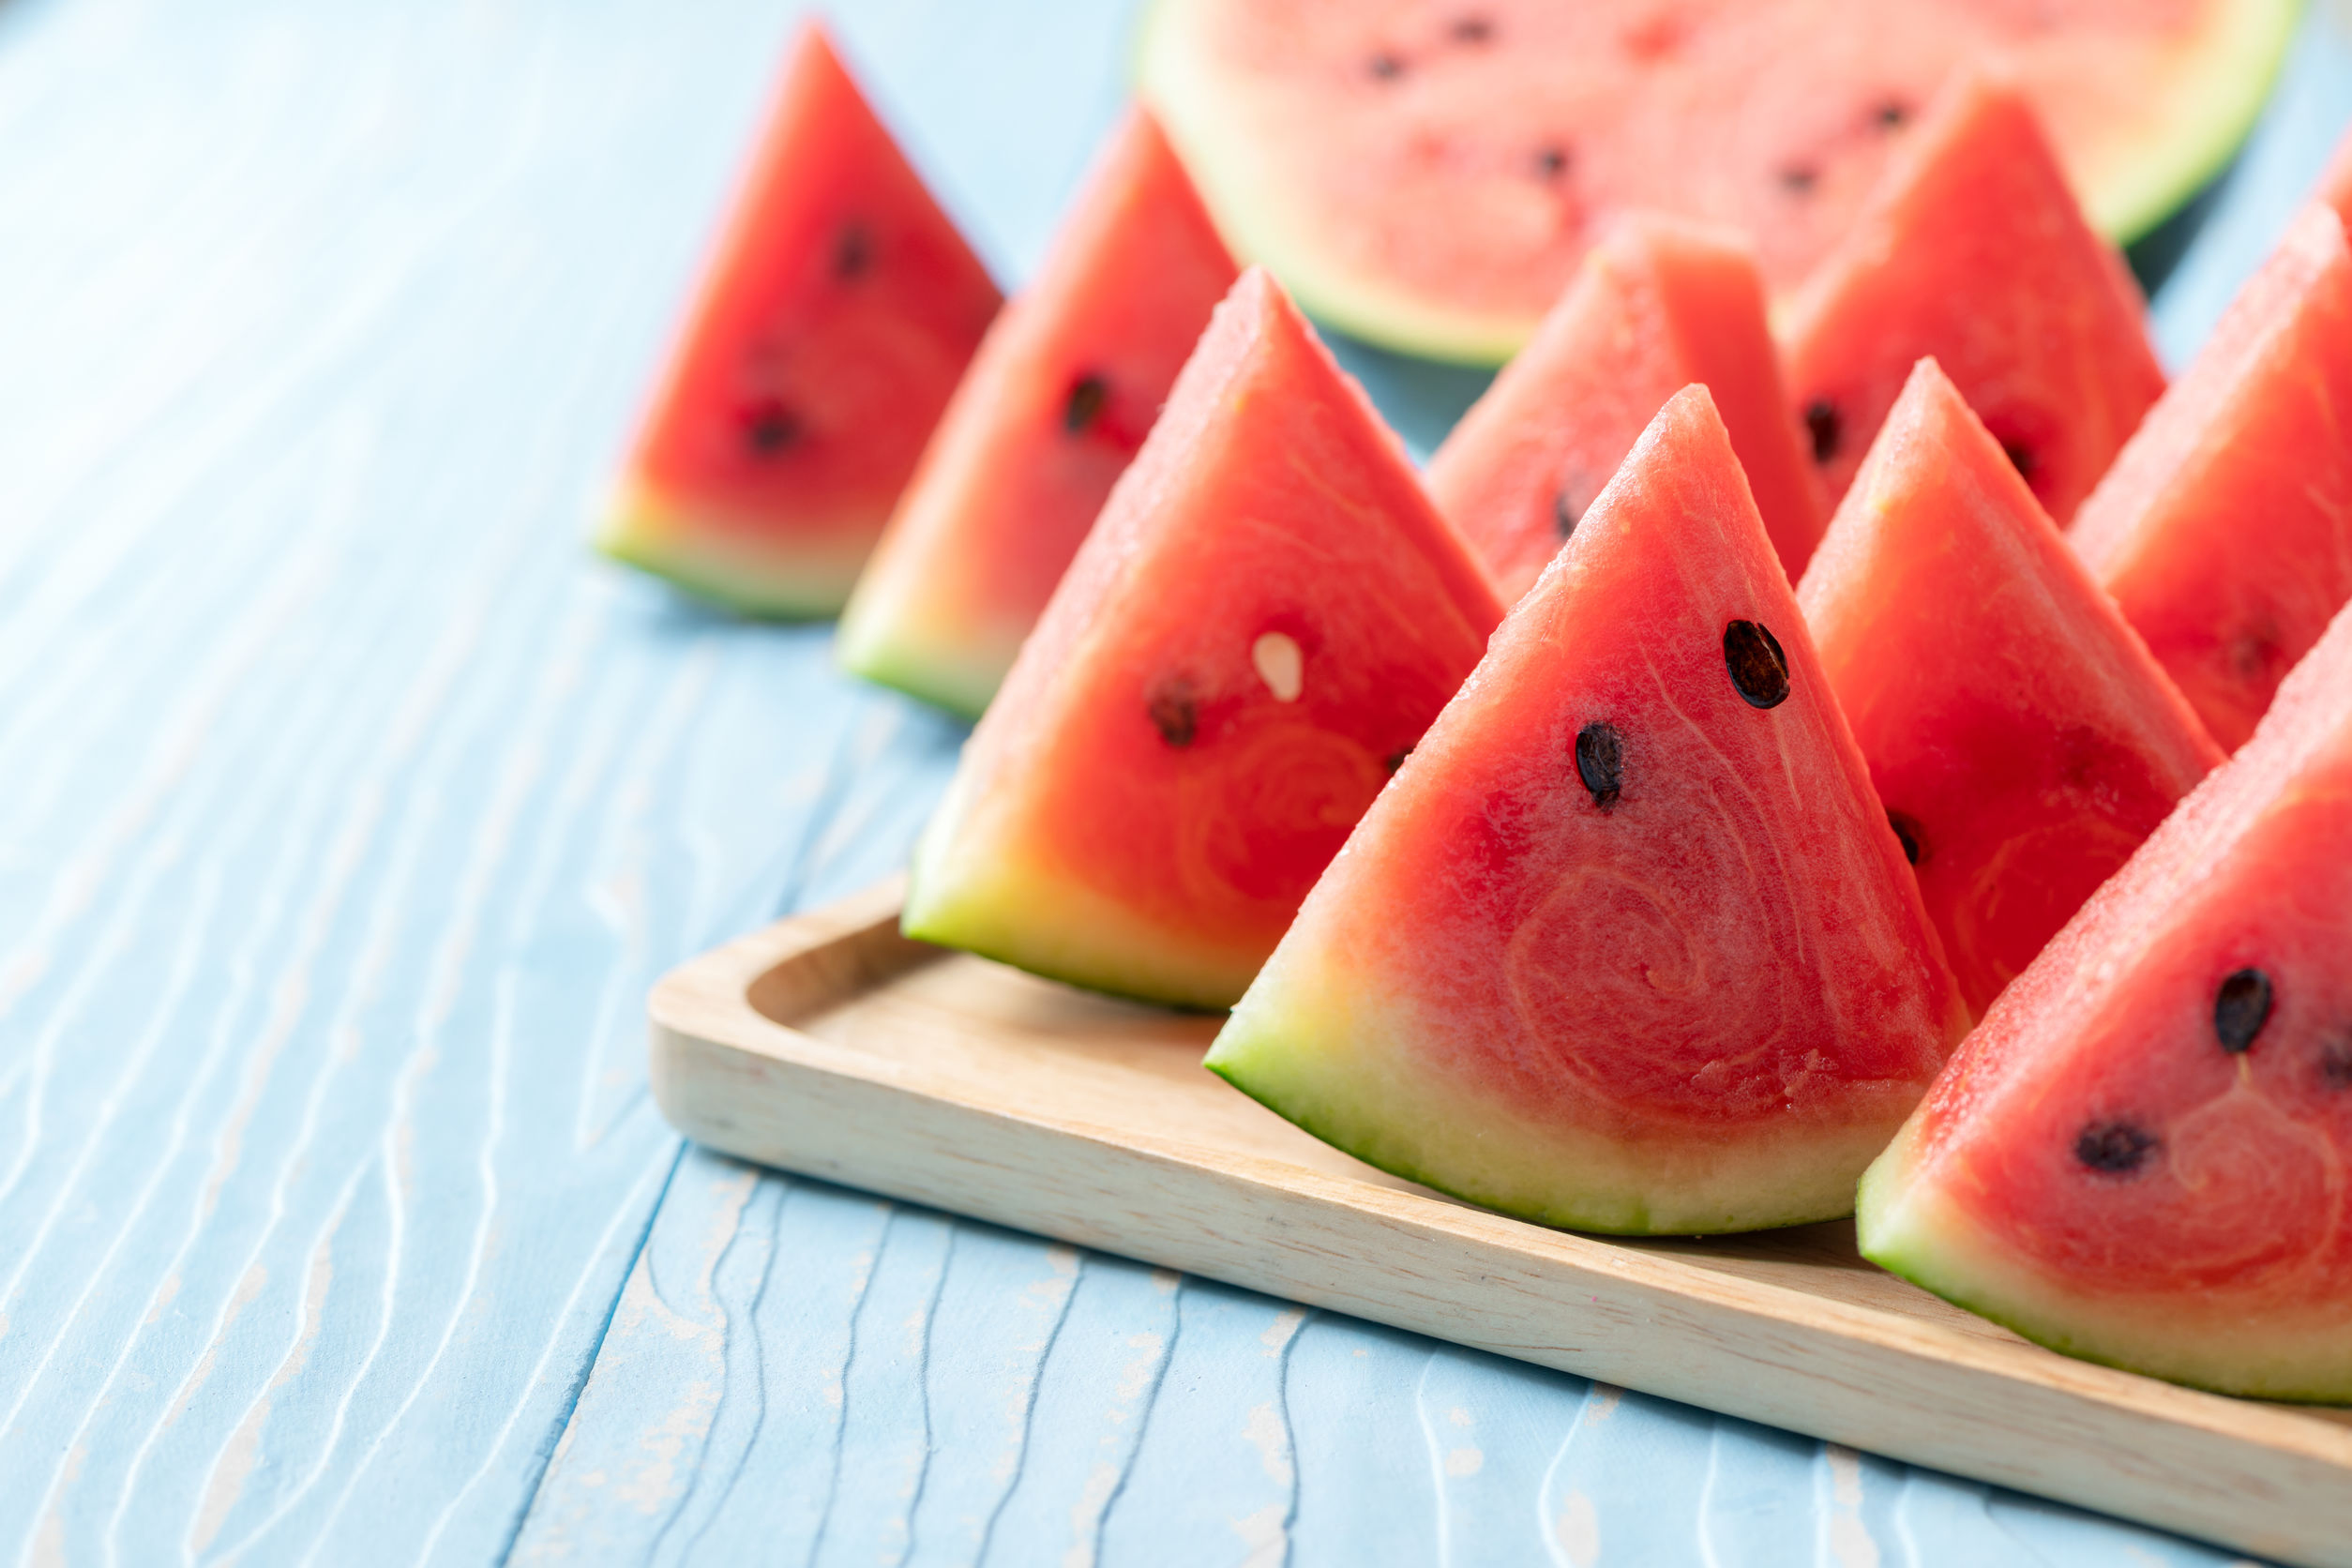 Watermelon slices on a wooden tray